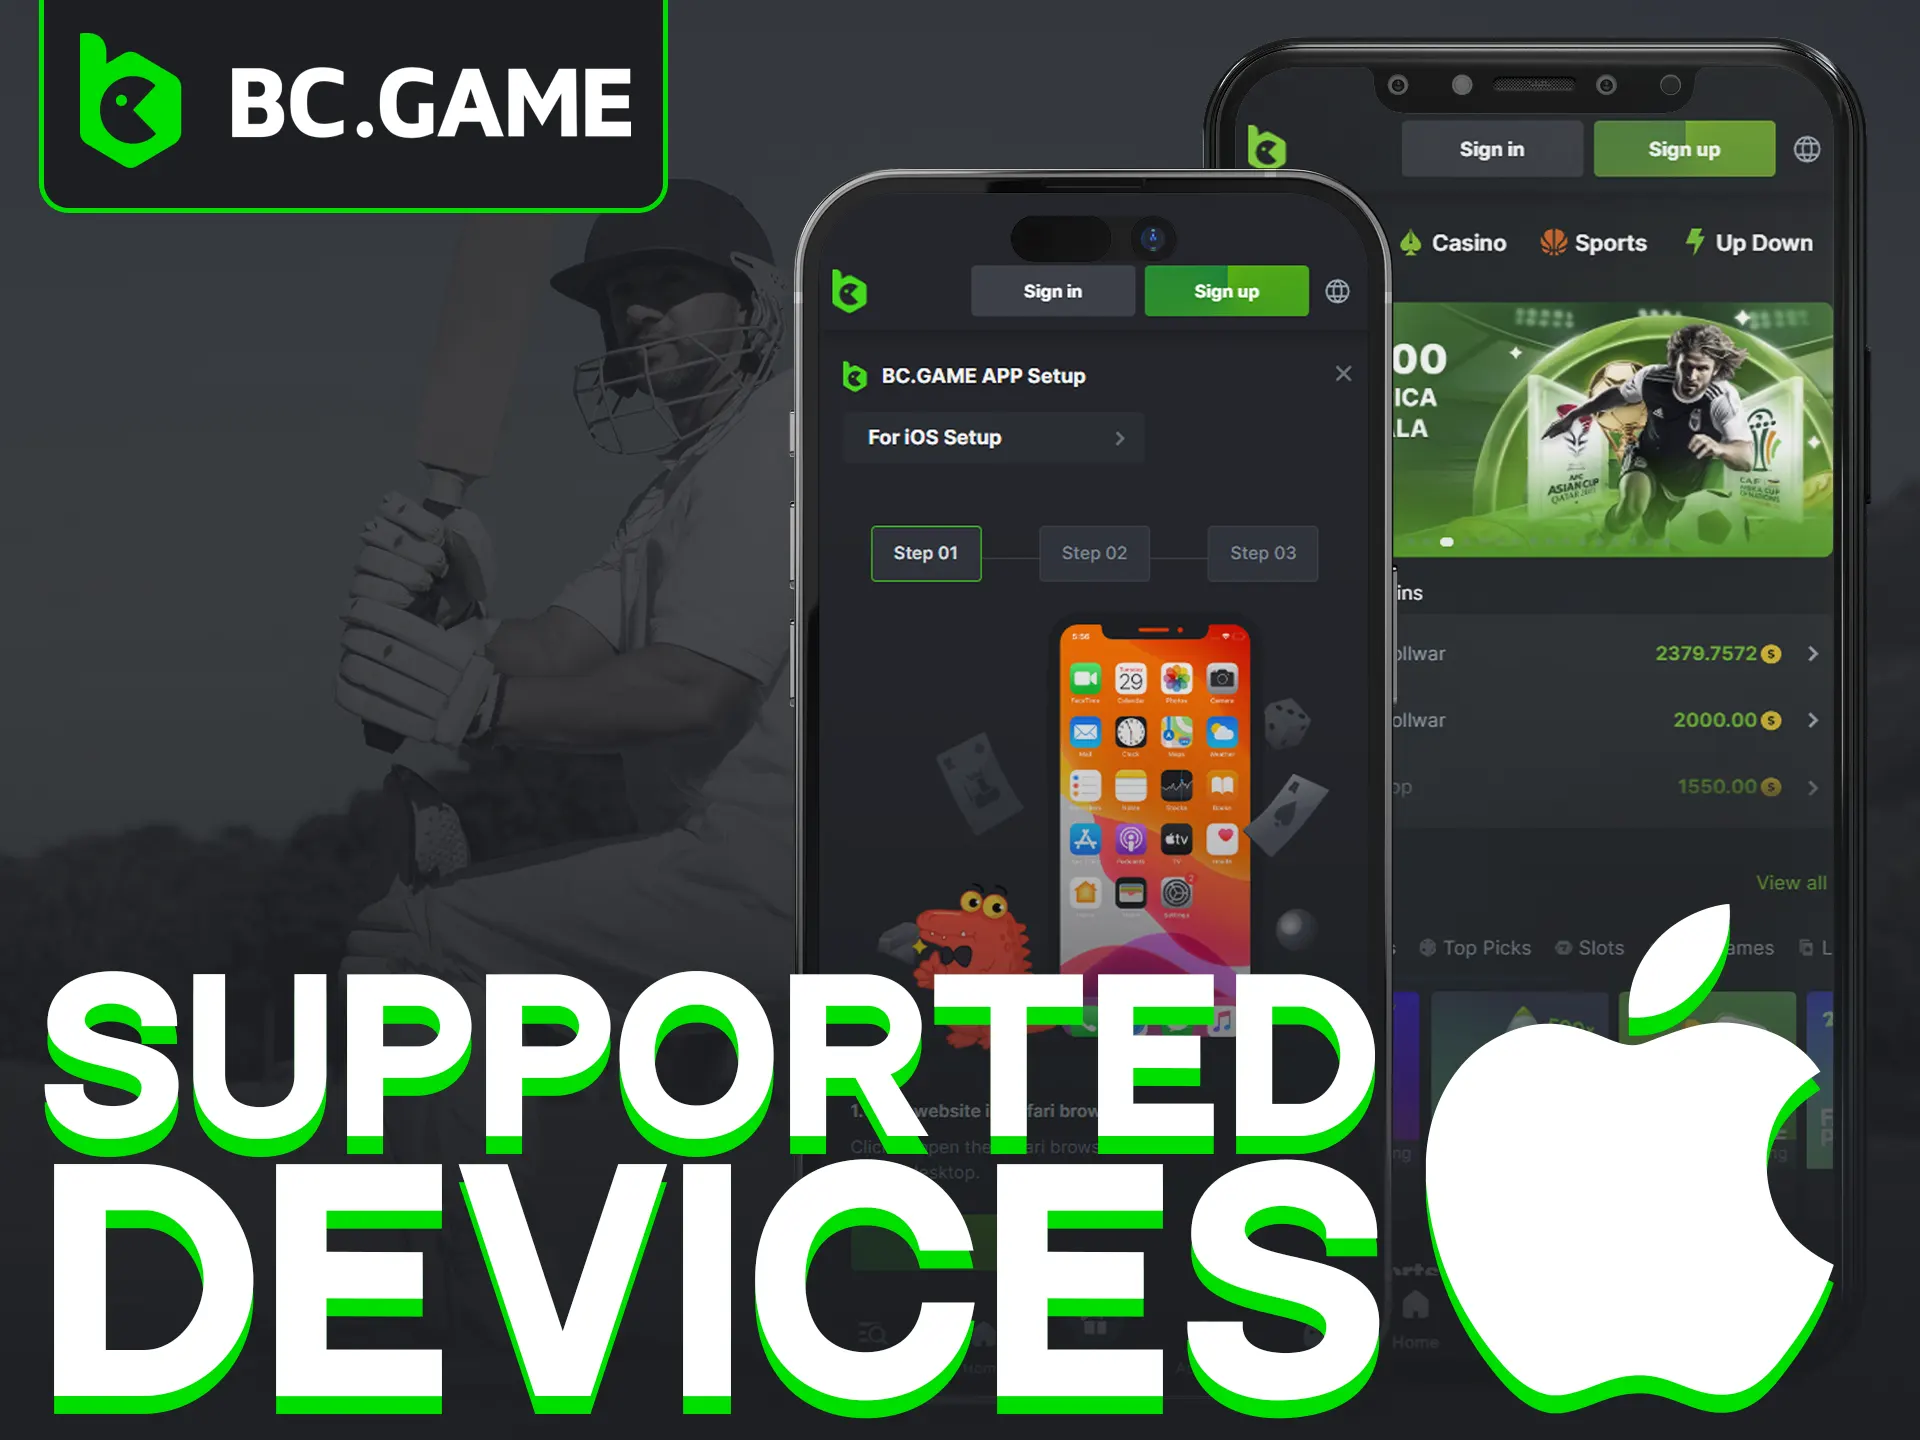 BC Game App compatible with updated at least to iOS 12 devices.